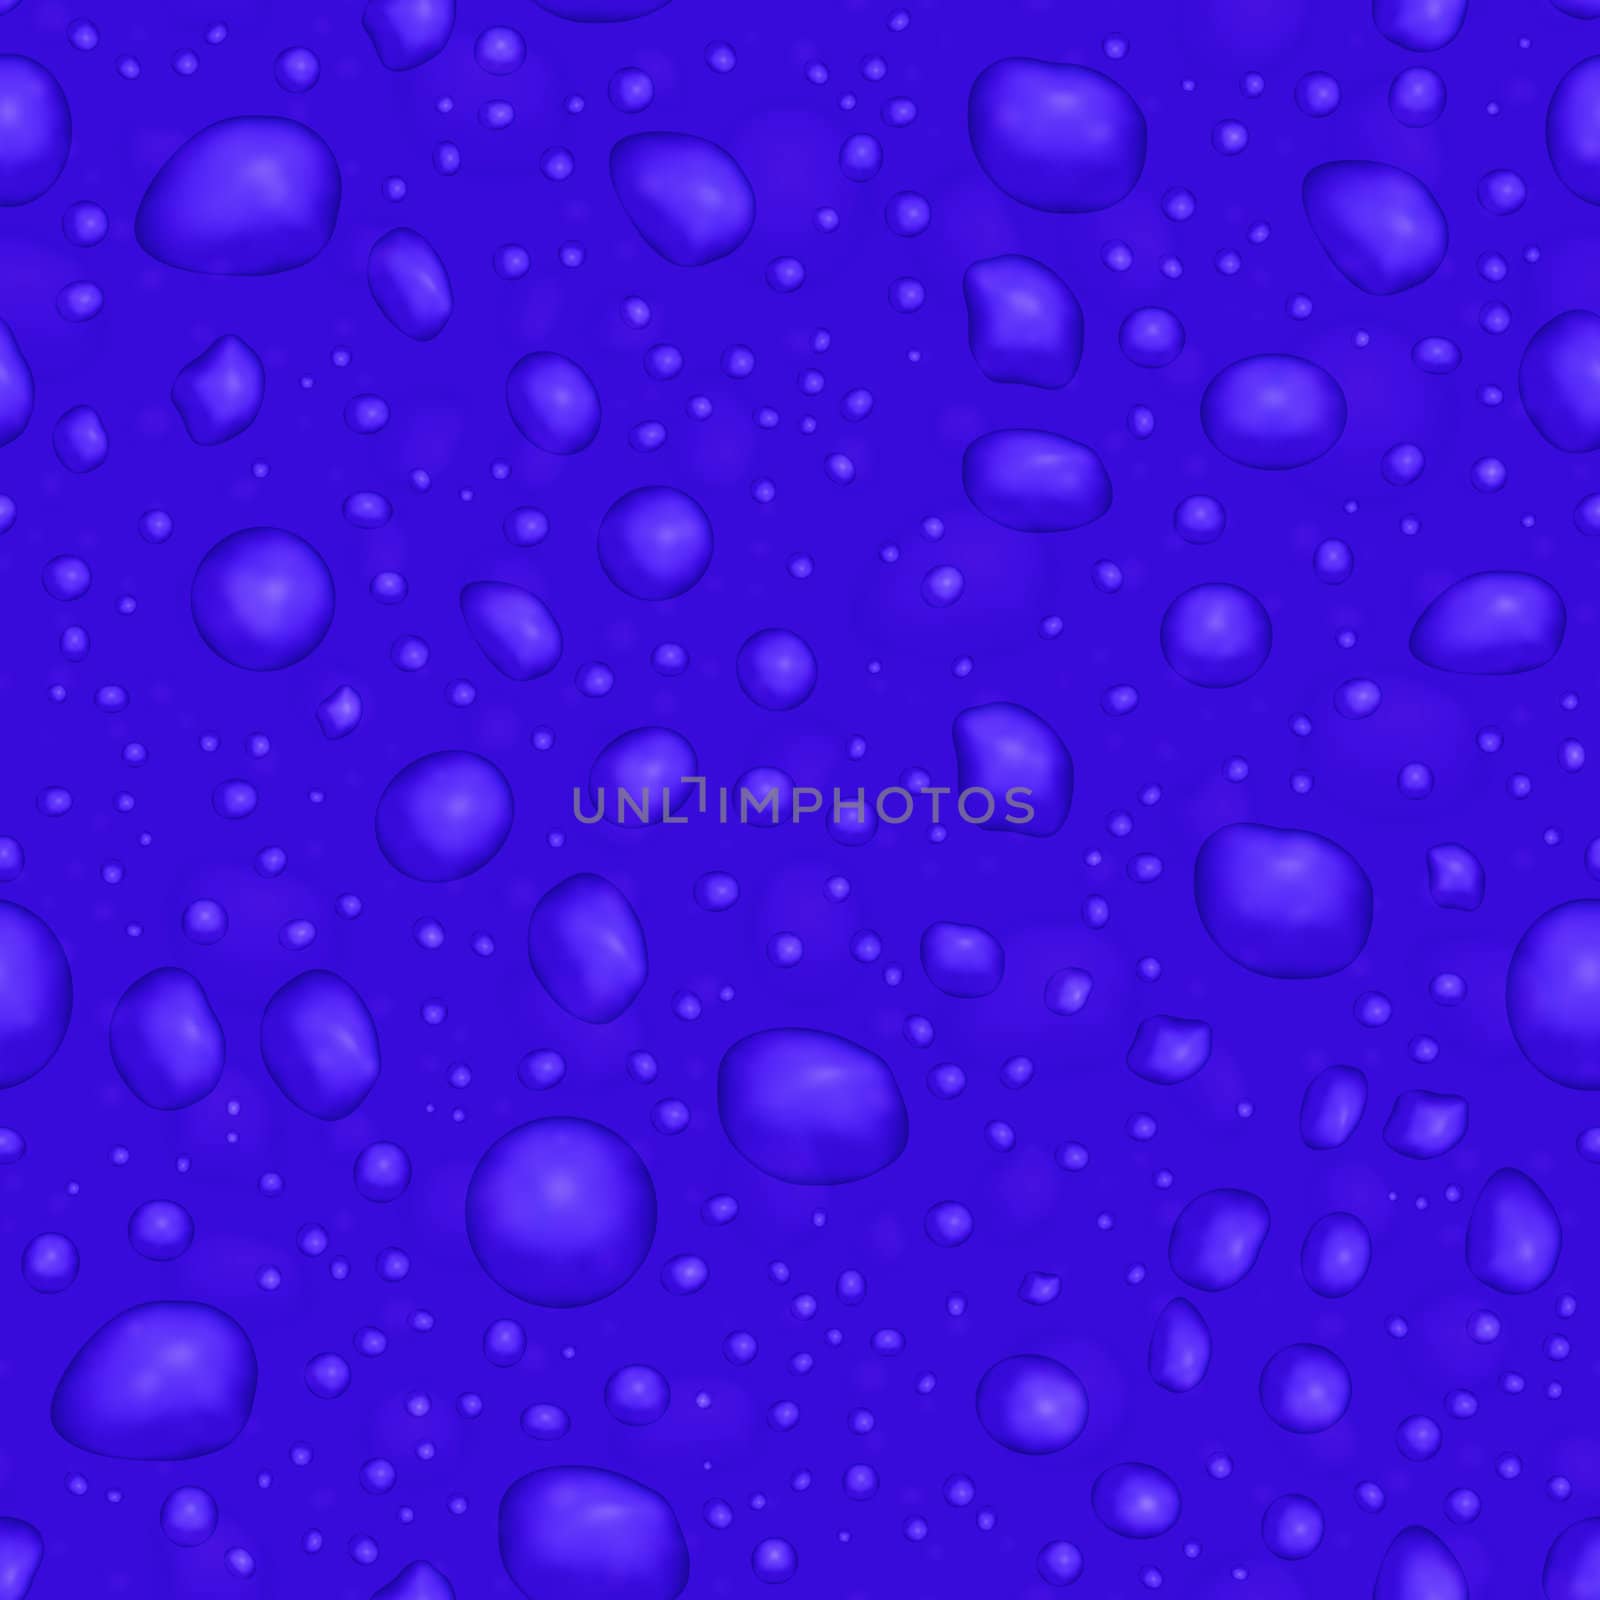 Seamless texture - transparent water droplets on a blue background